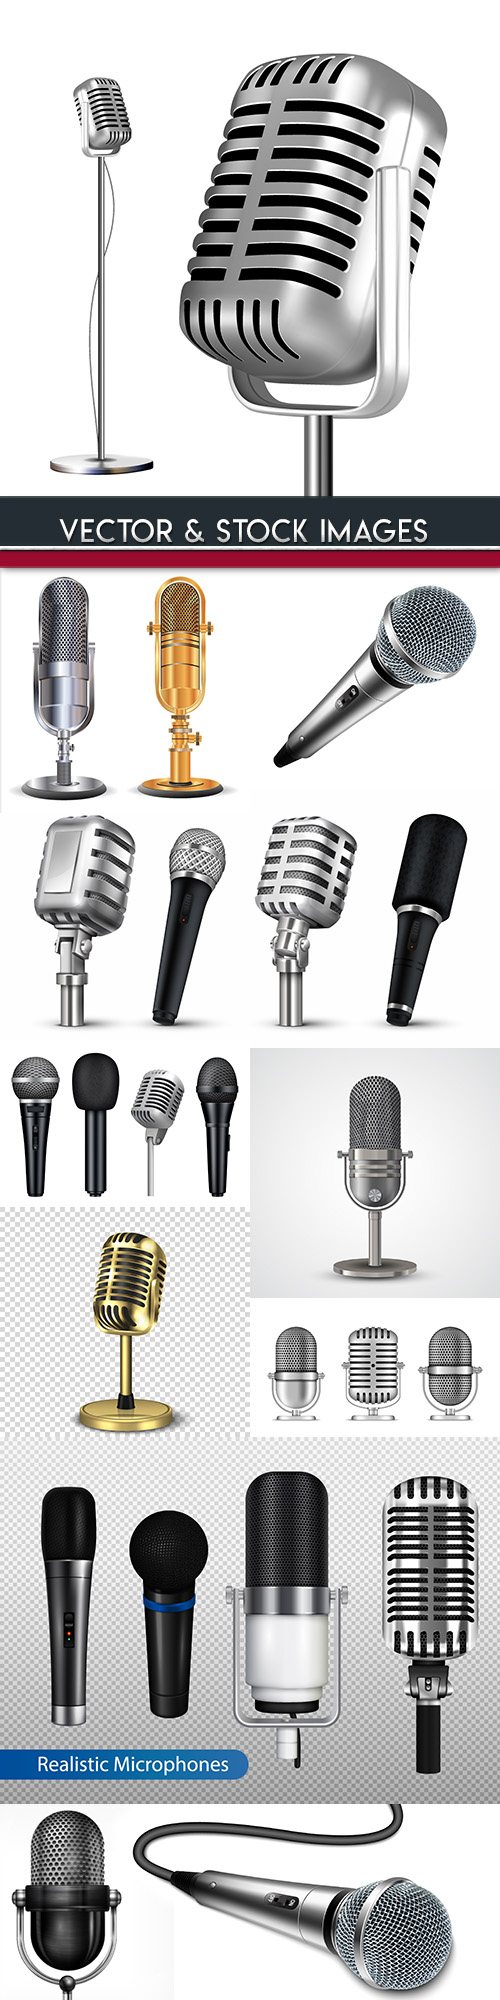 Music microphone collection 3d illustration